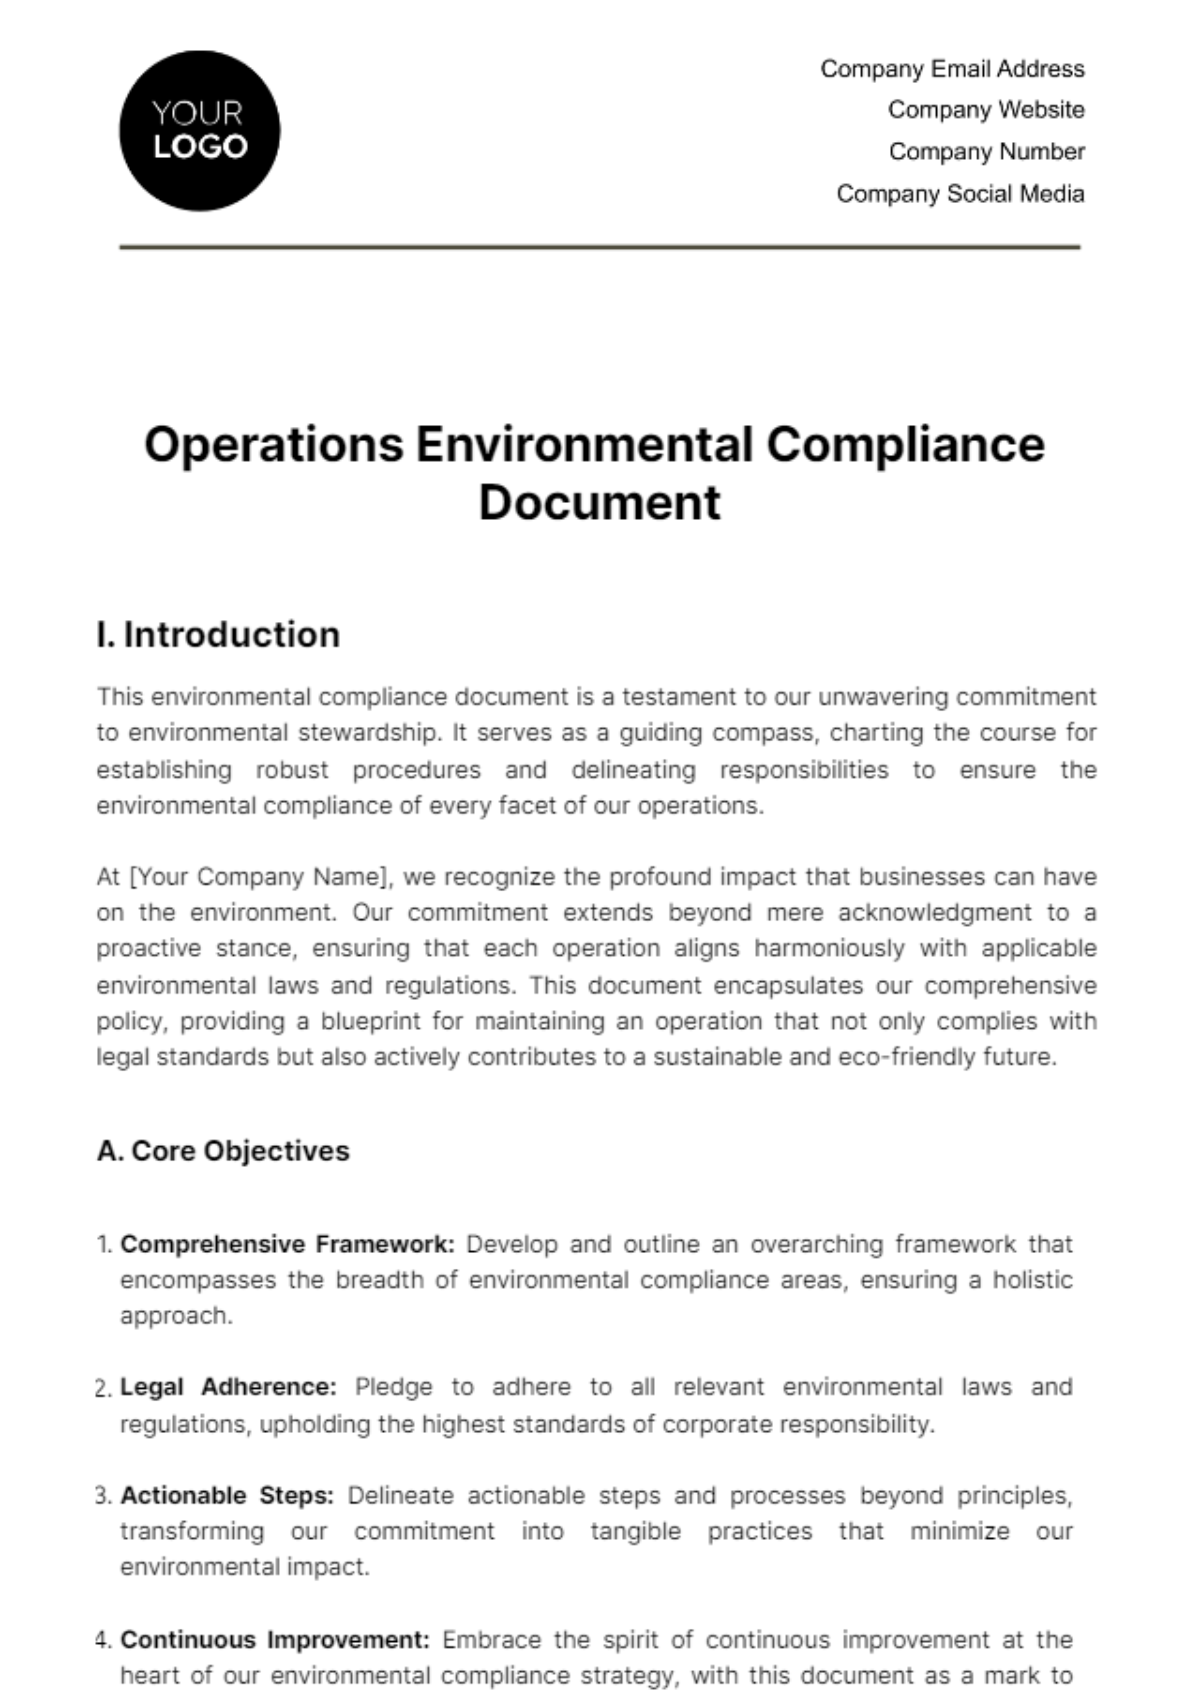 Operations Environmental Compliance Document Template